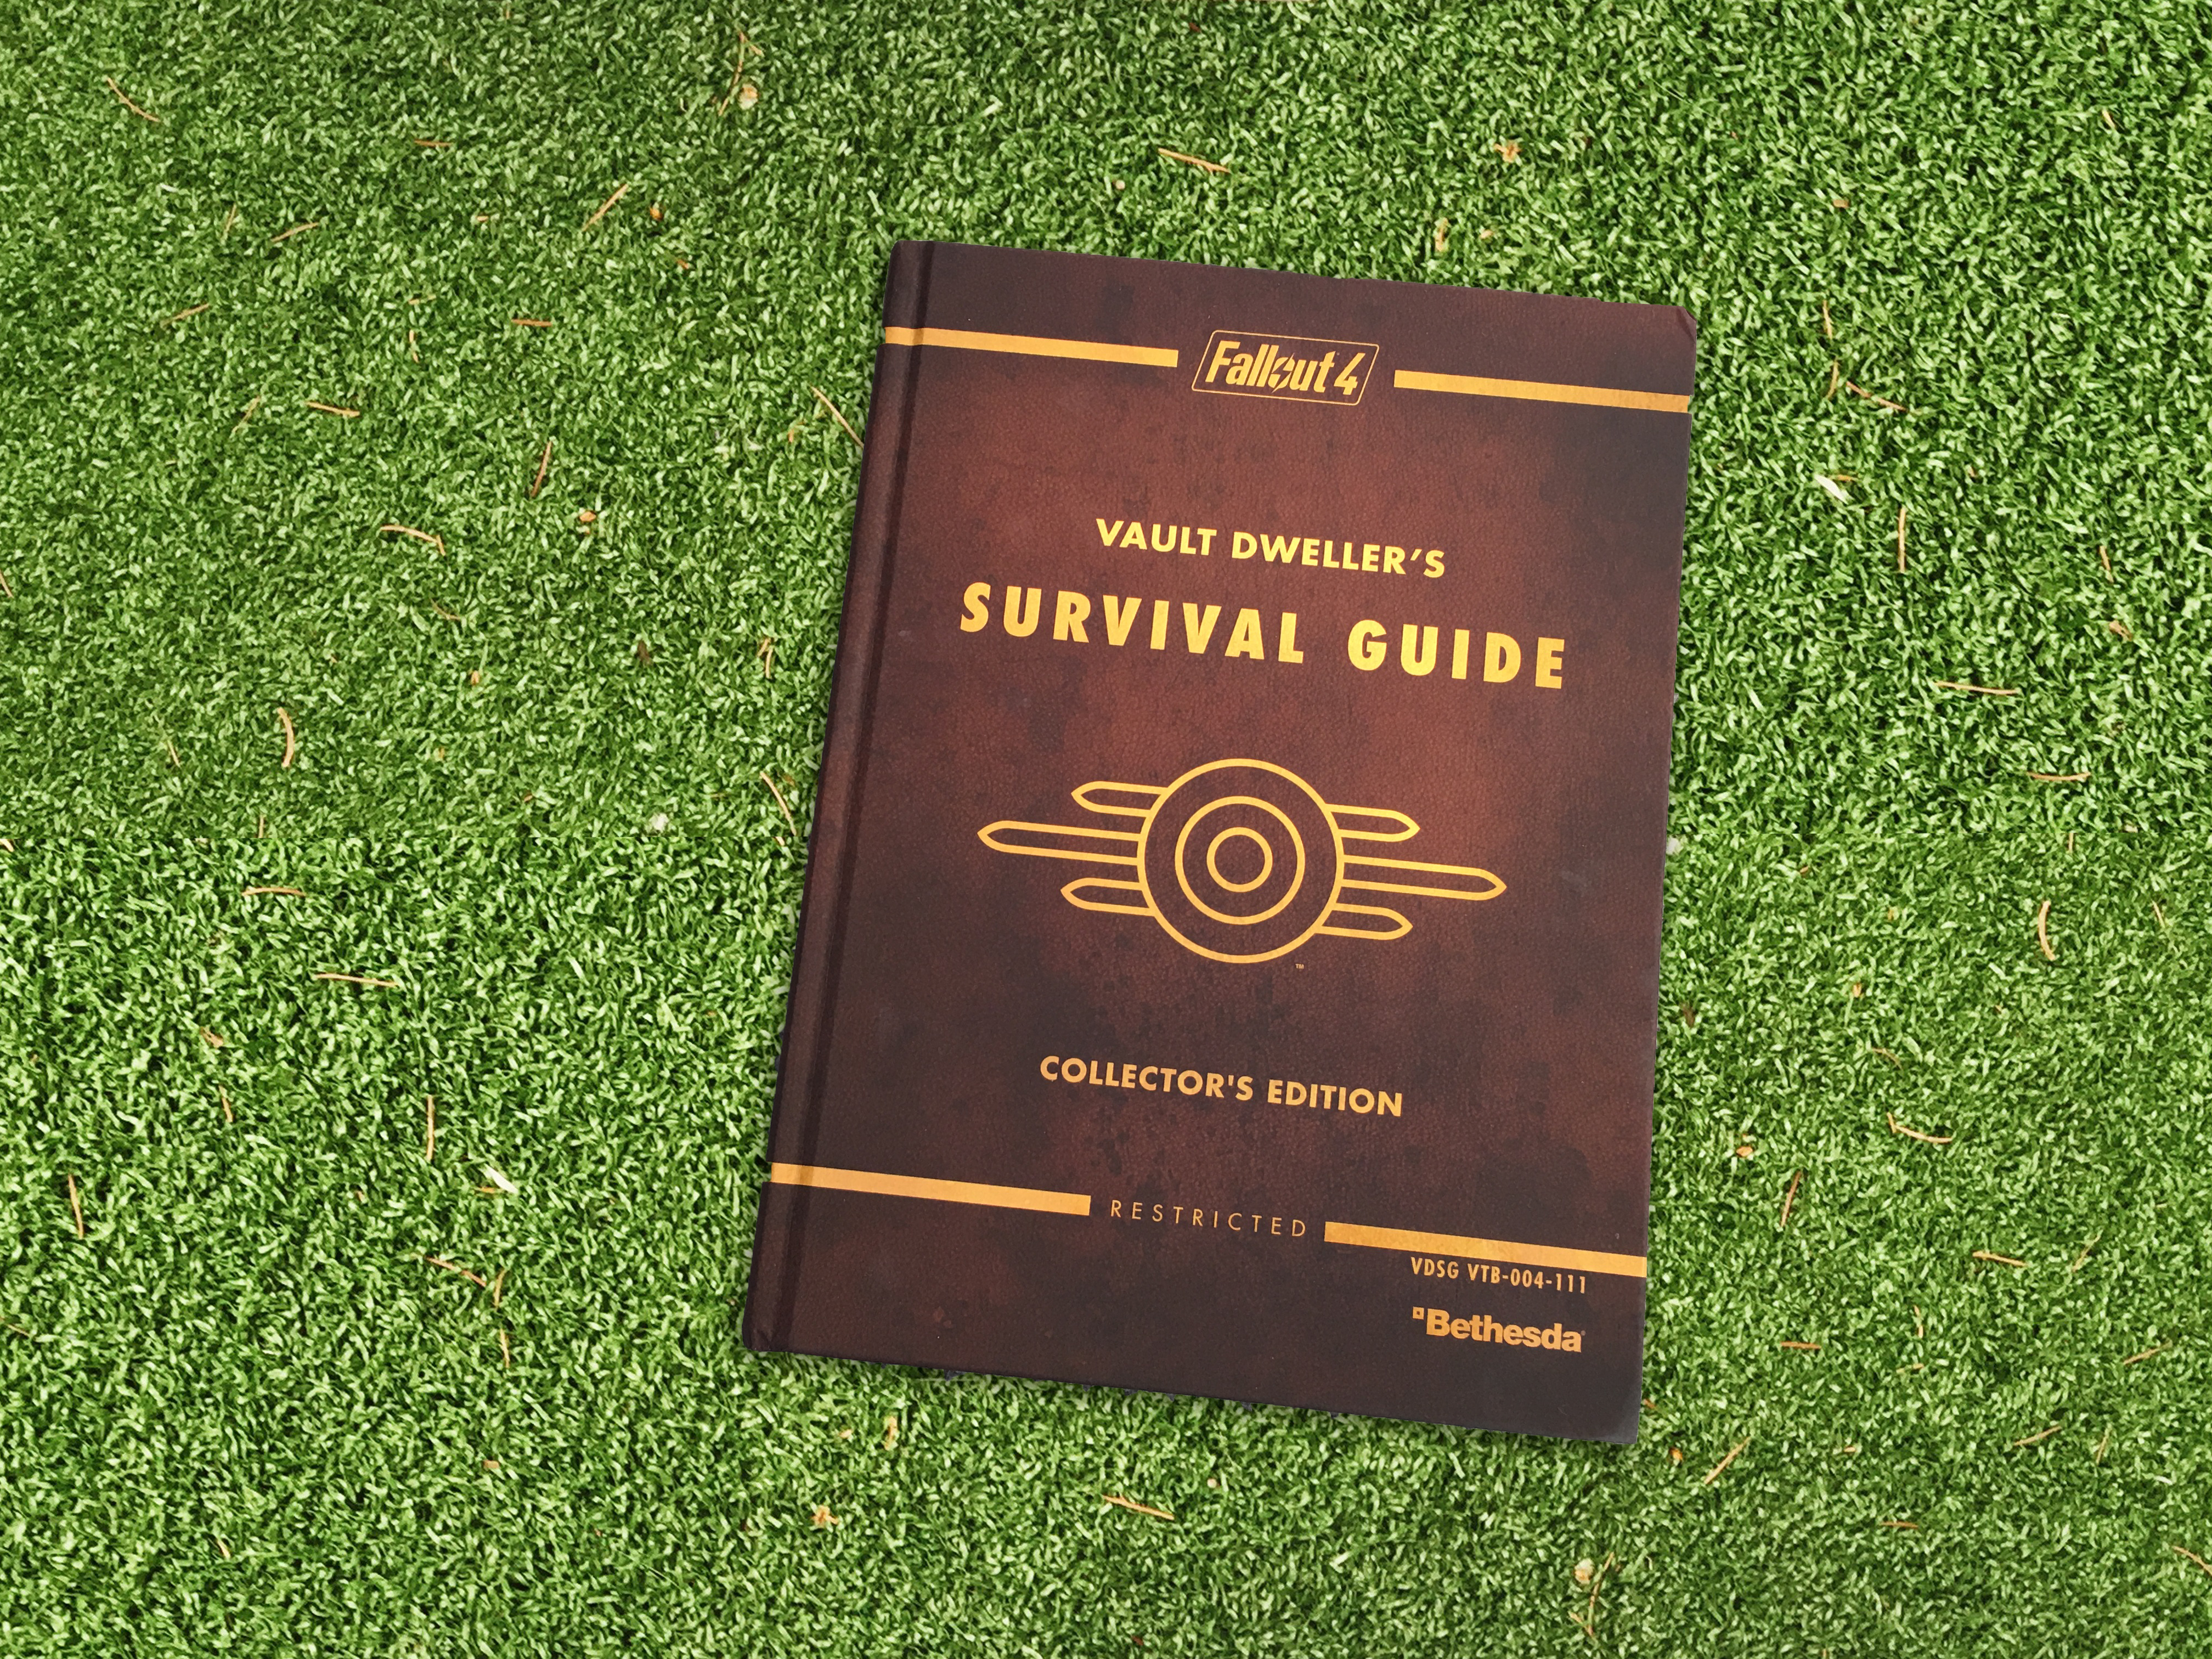 In-depth Look: Fallout 4 Collector's Edition Survival Guide